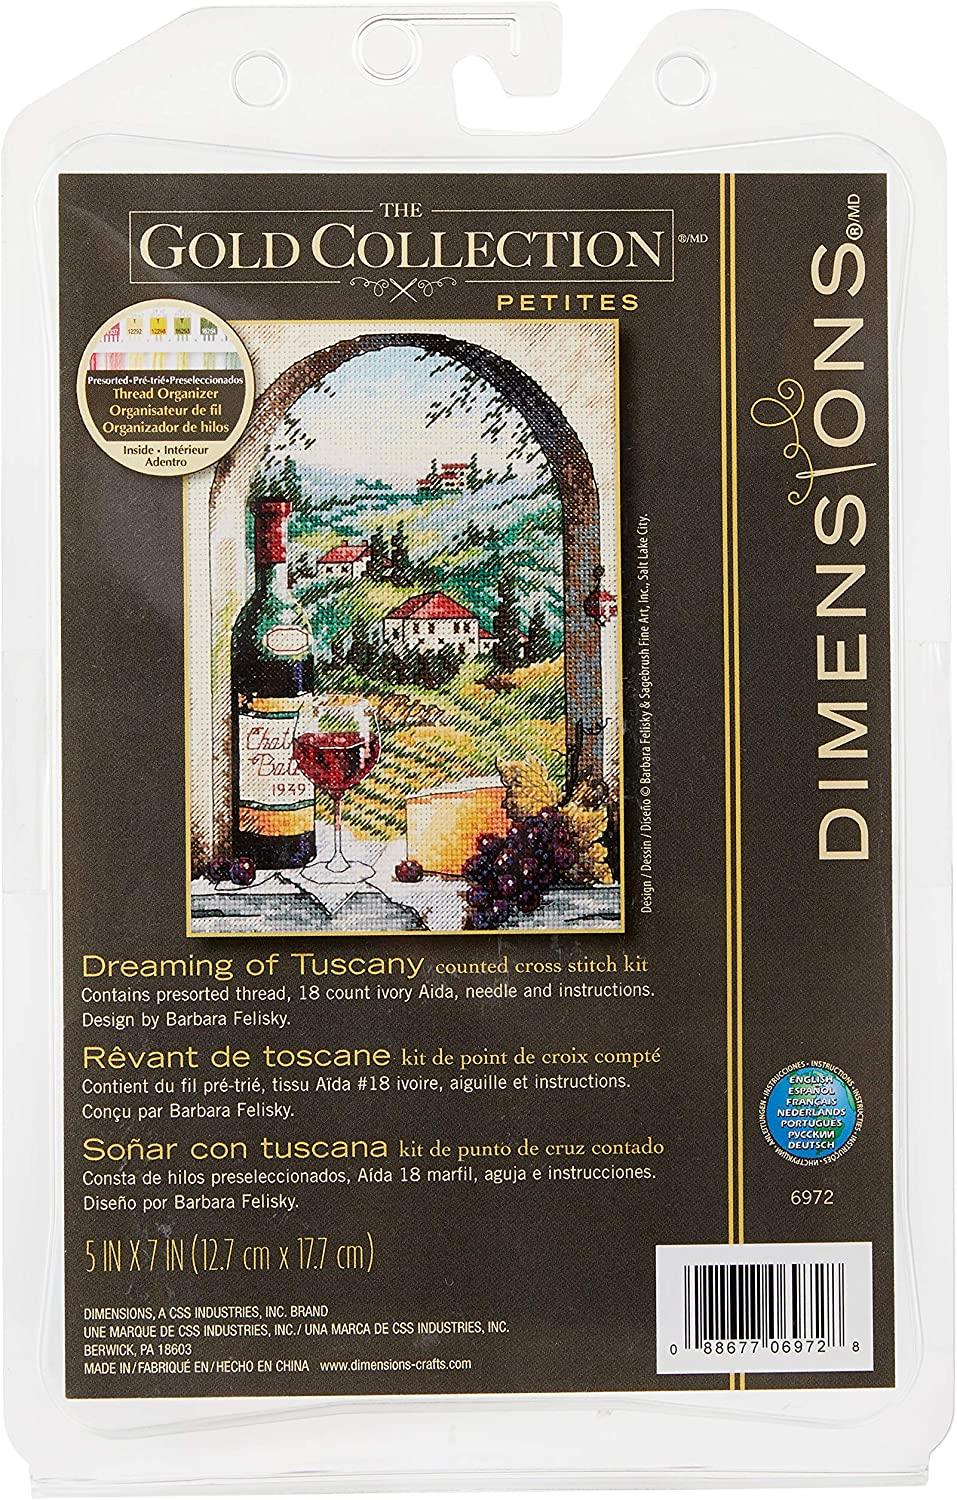 DREAMING OF TUSCANY, Counted Cross Stitch Kit, 18 count ivory Aida, DIMENSIONS (06972)